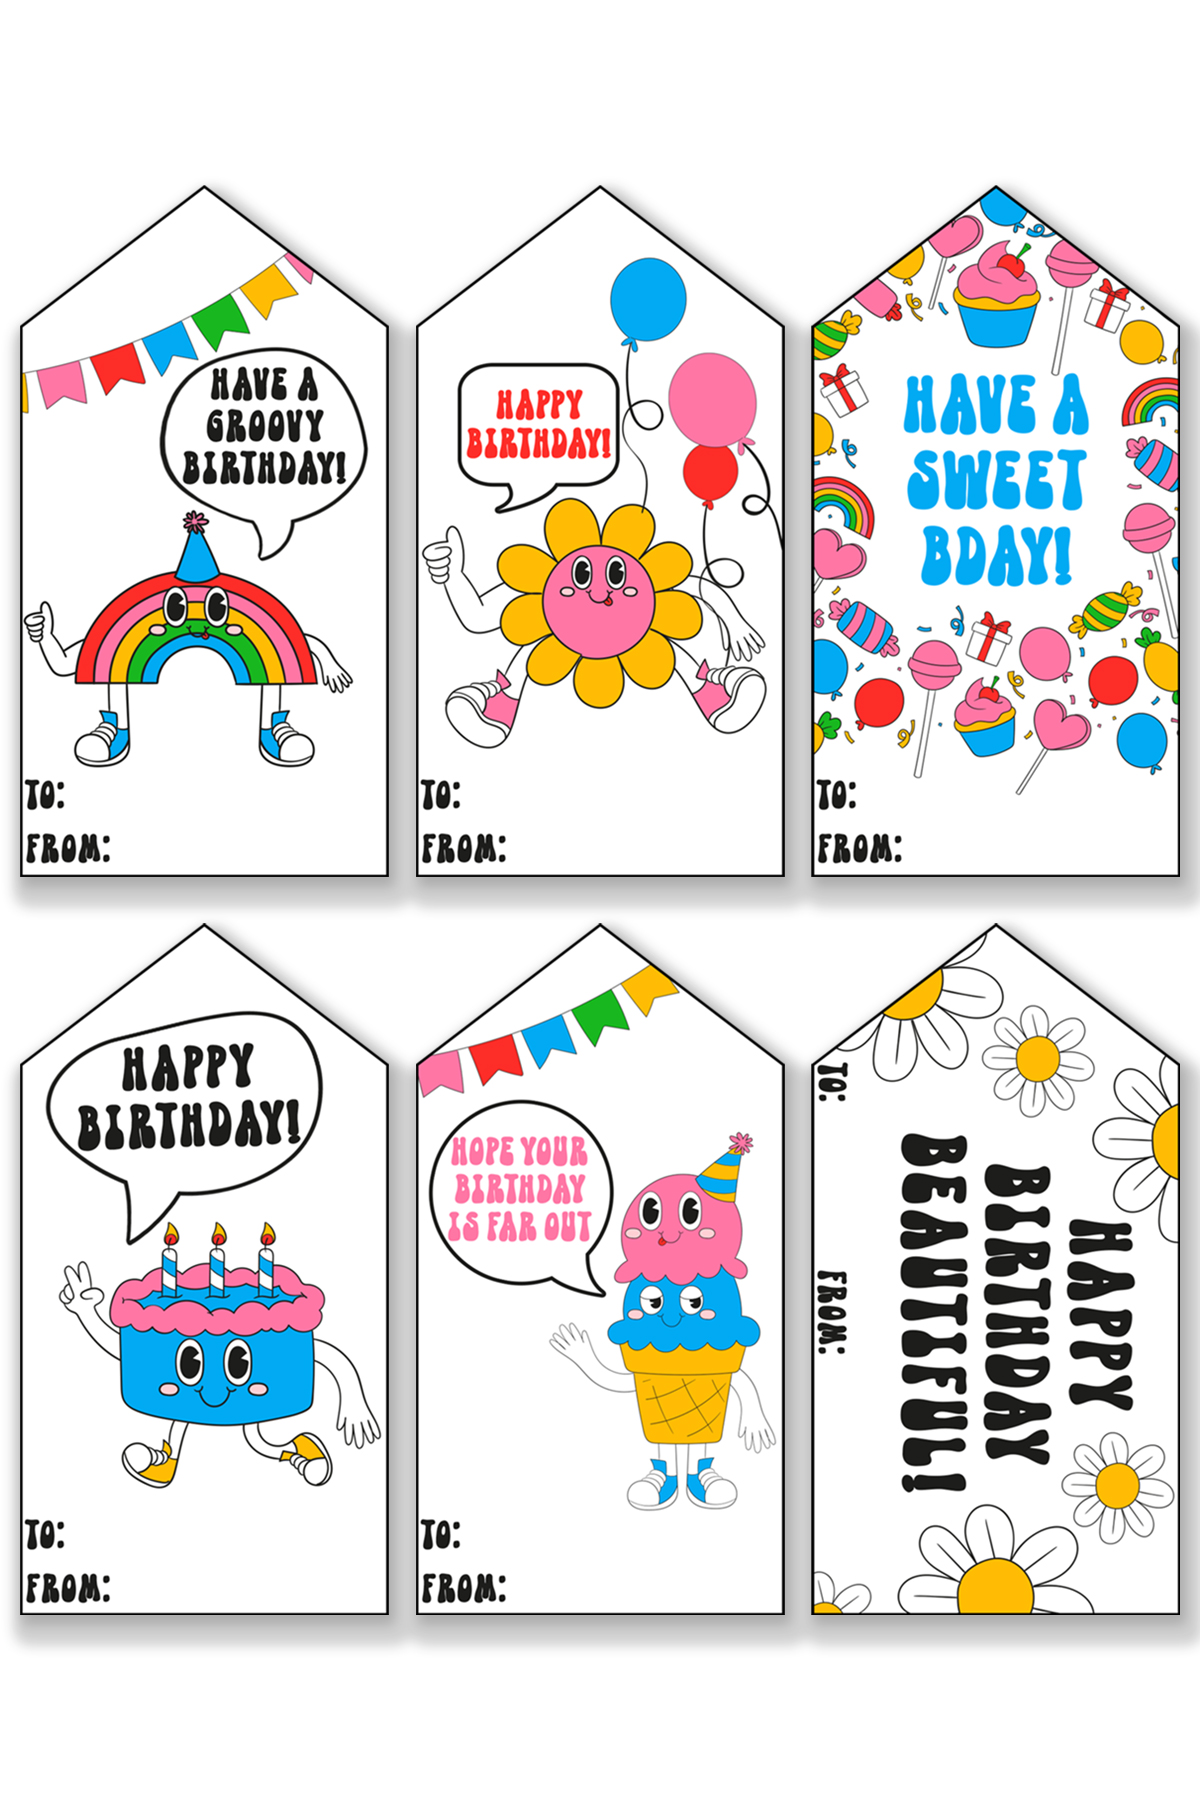 This image is showing one of the free printable birthday tags set - each tag has a retro look.